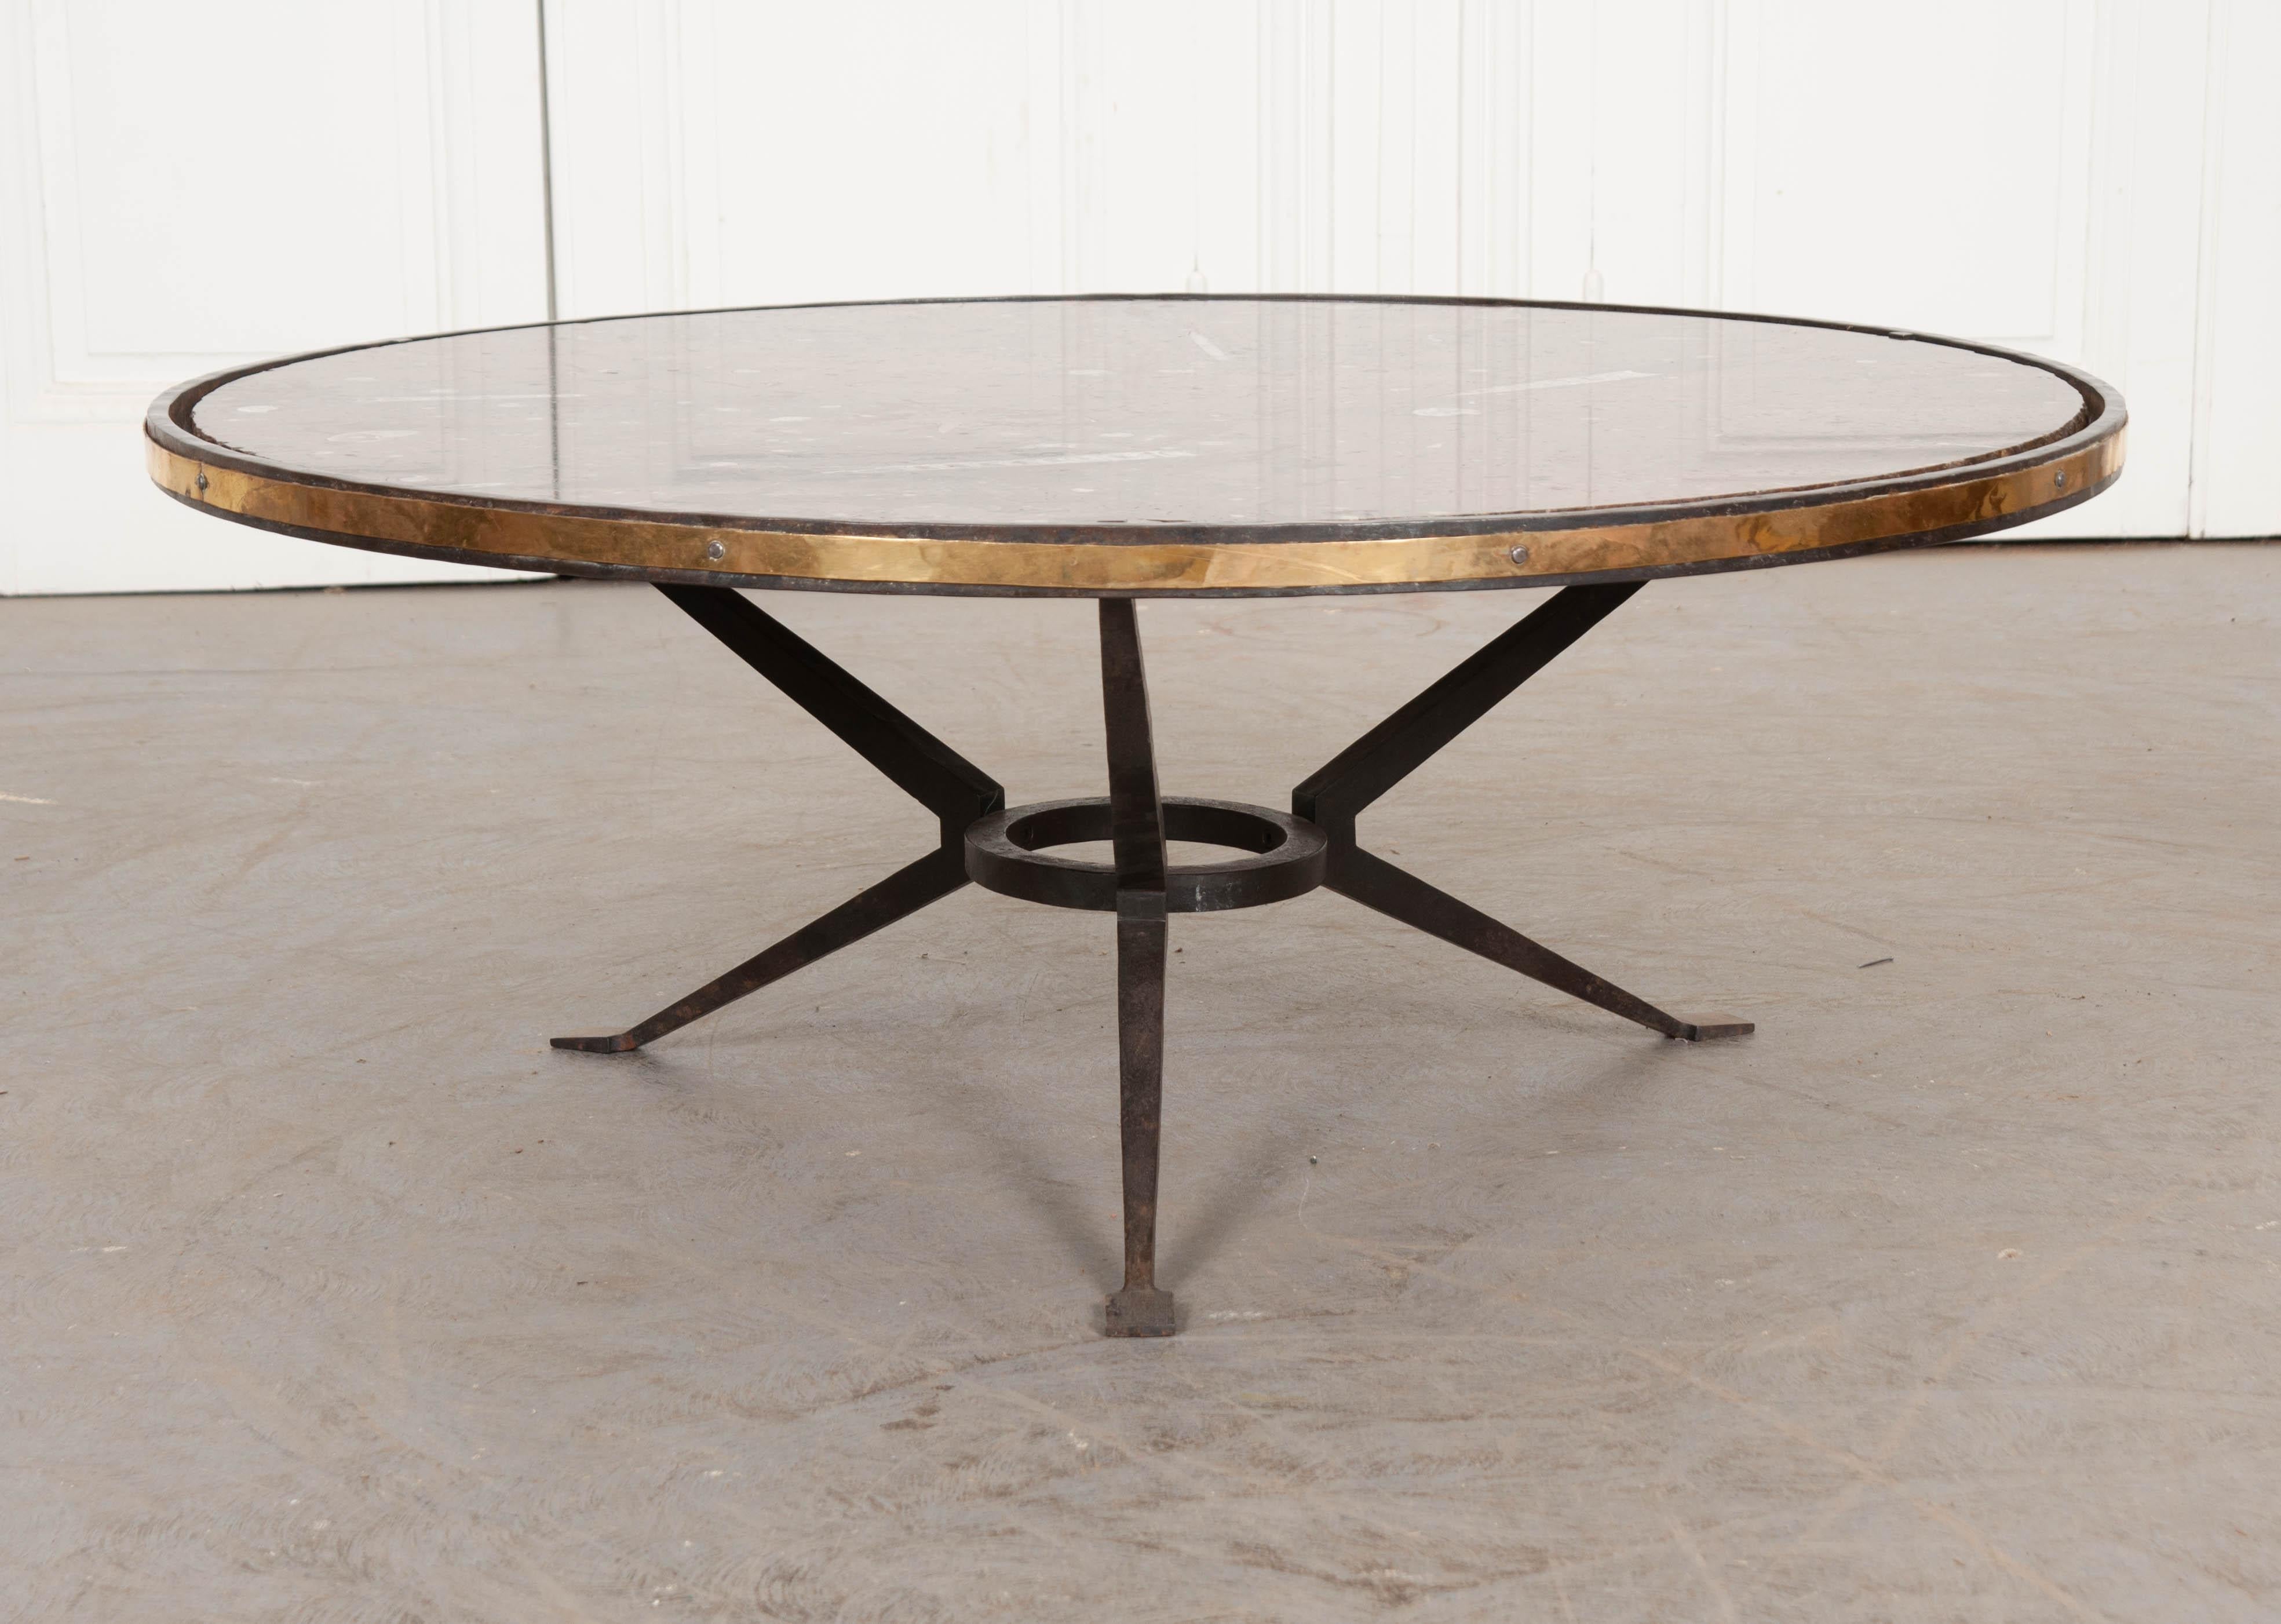 This refined coffee table was made in France, circa 1950. This unique table is a true one-of-a-kind. The table’s base was forged by hand out of iron. The circular piece of fossil marble that tops the table is spectacular and features a hand-chiseled